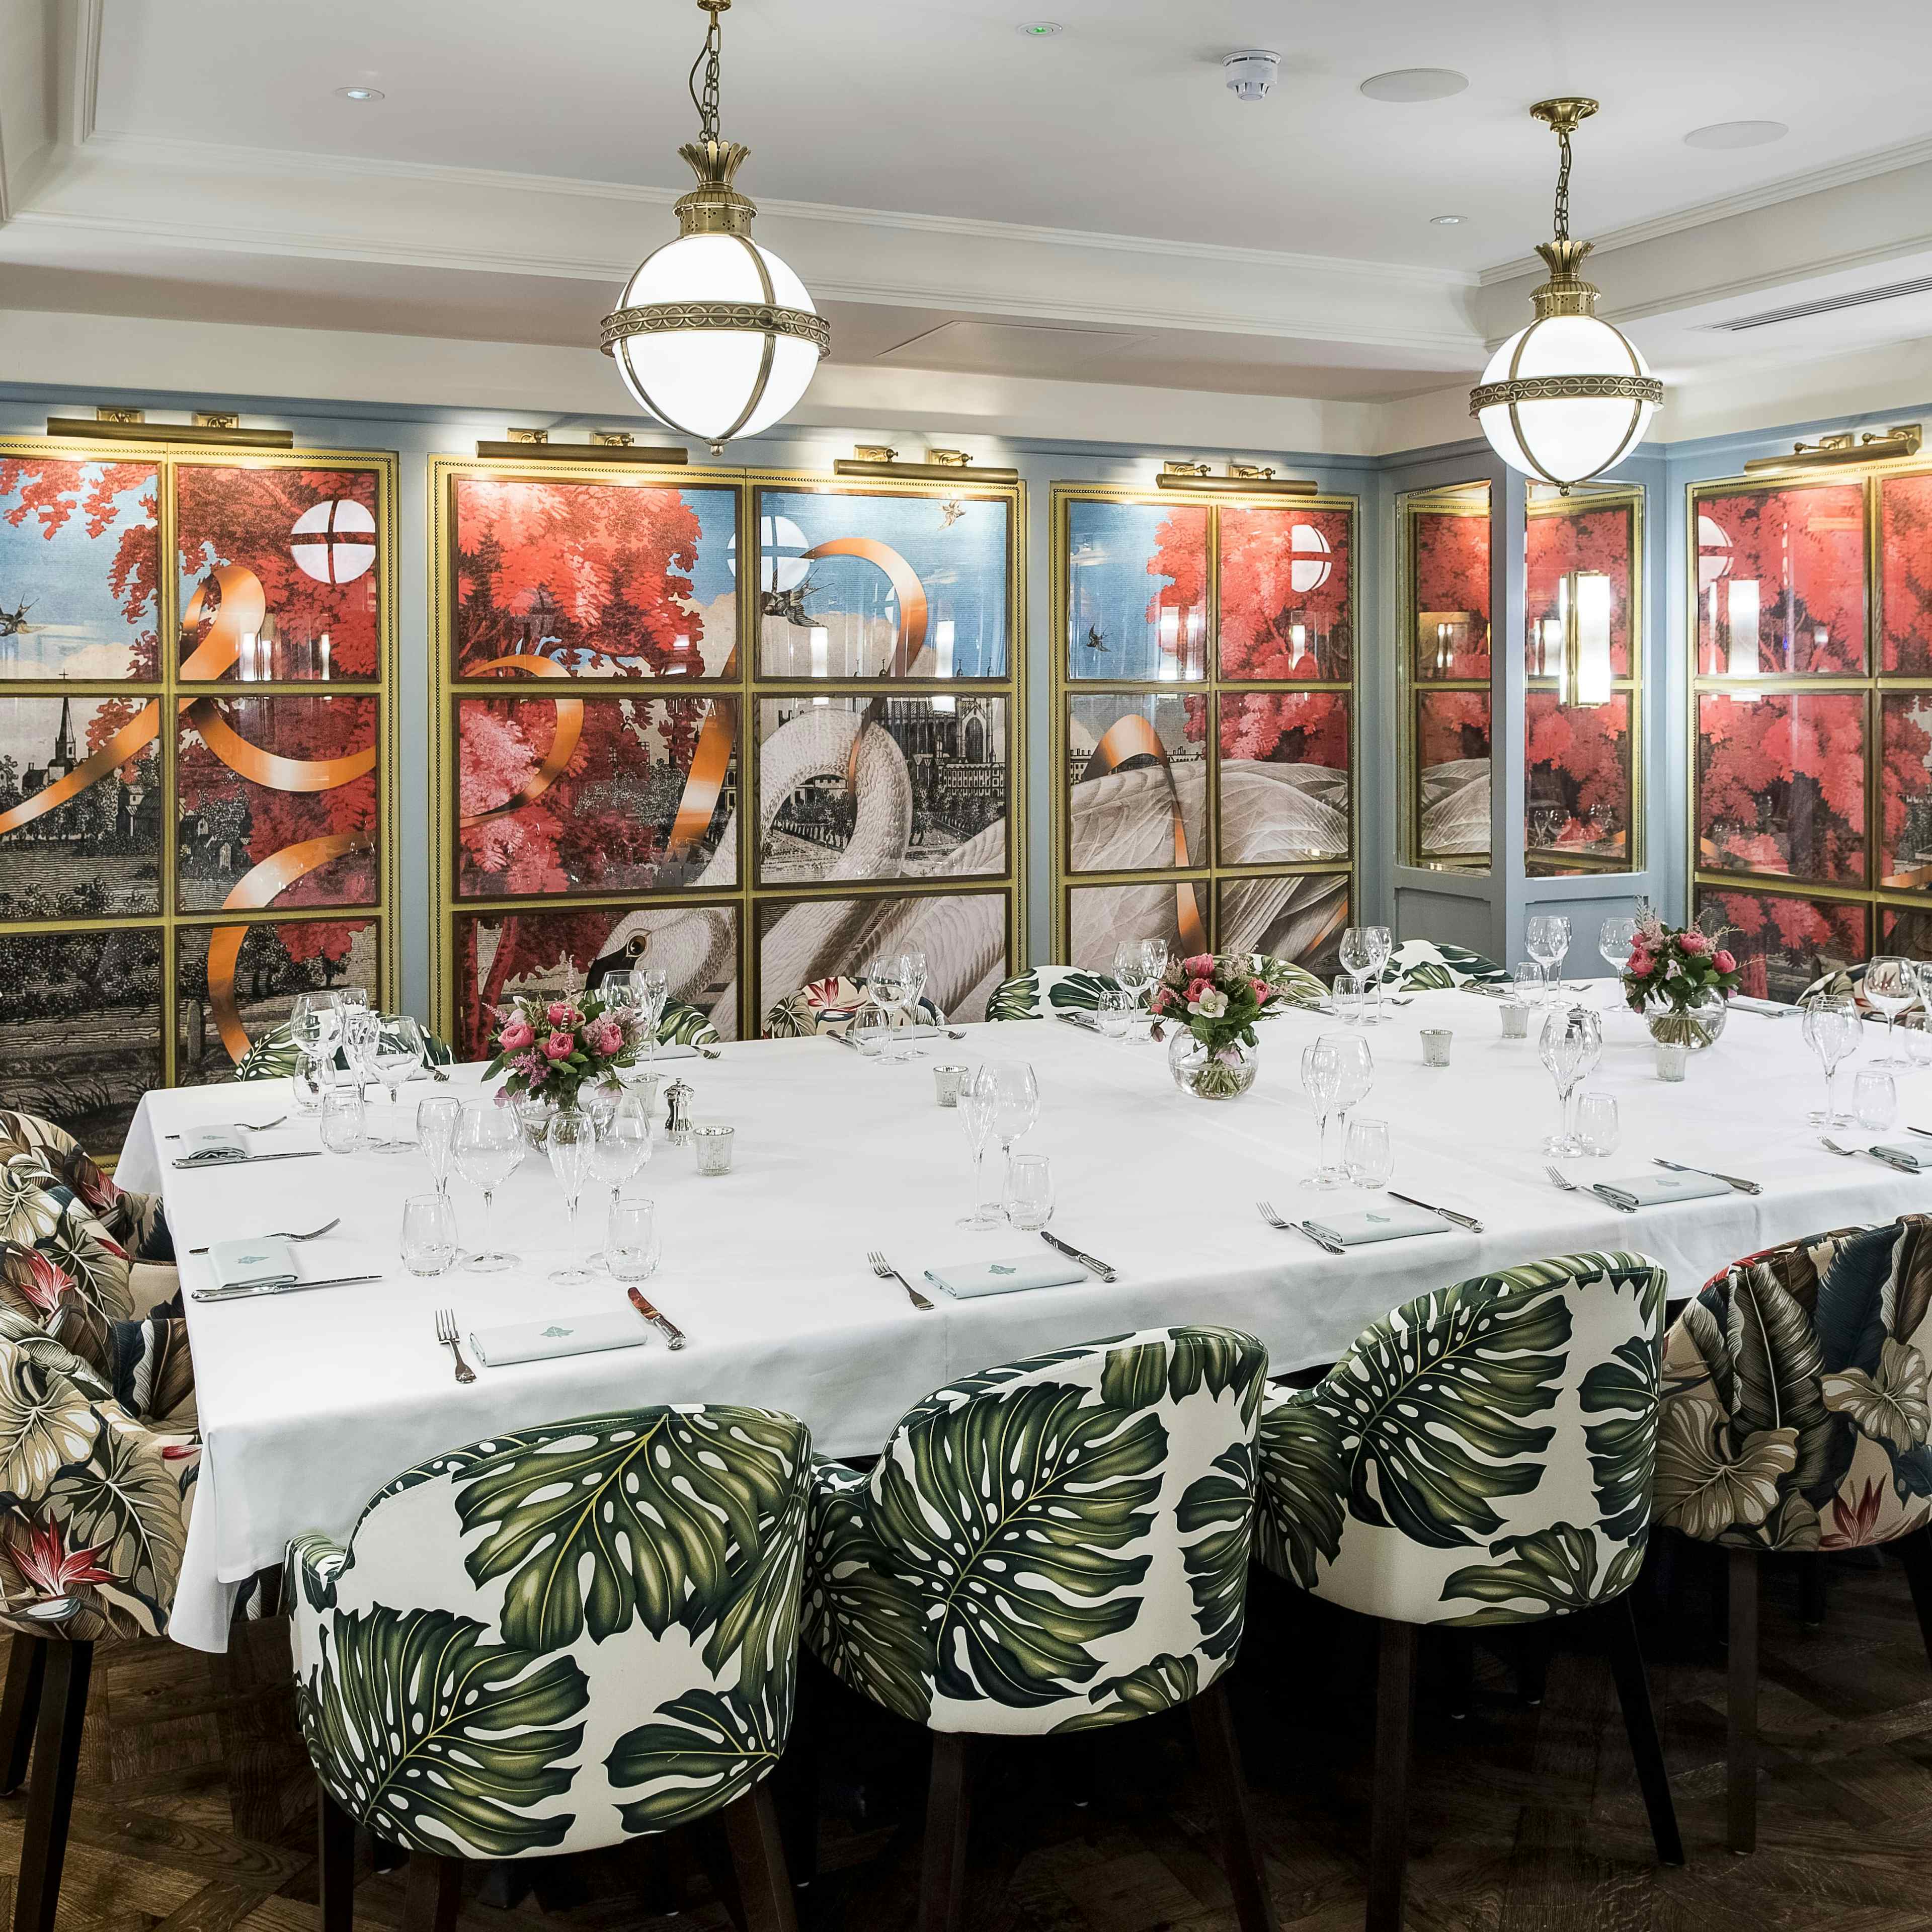 The Ivy Cambridge Brasserie - The Boat Room image 2